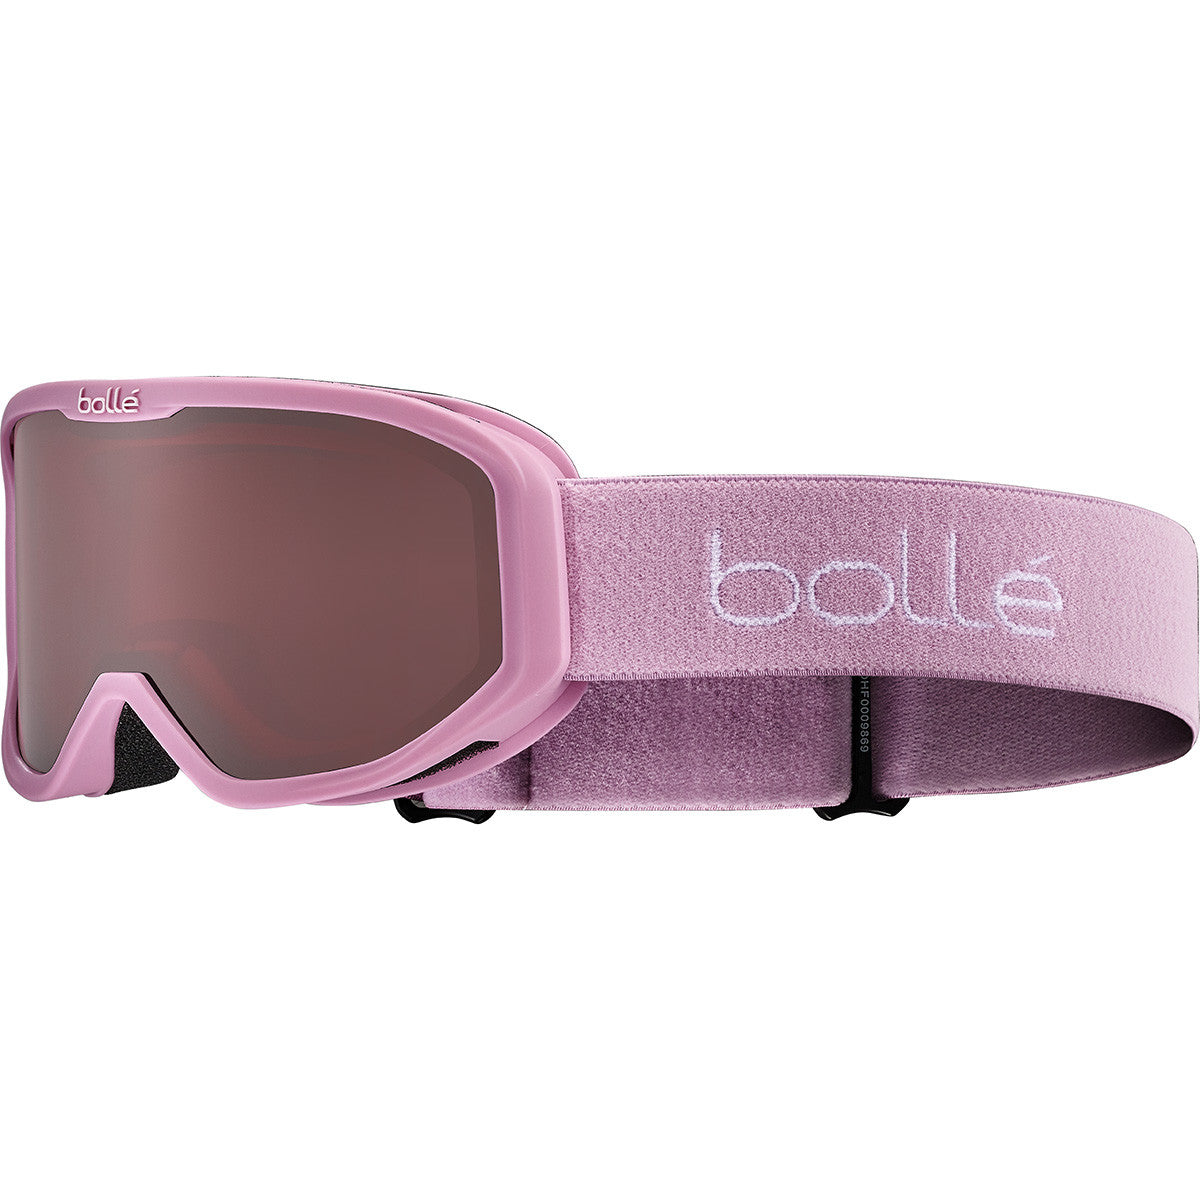 Bolle Inuk Goggles  Pink Matte Extra Small One size